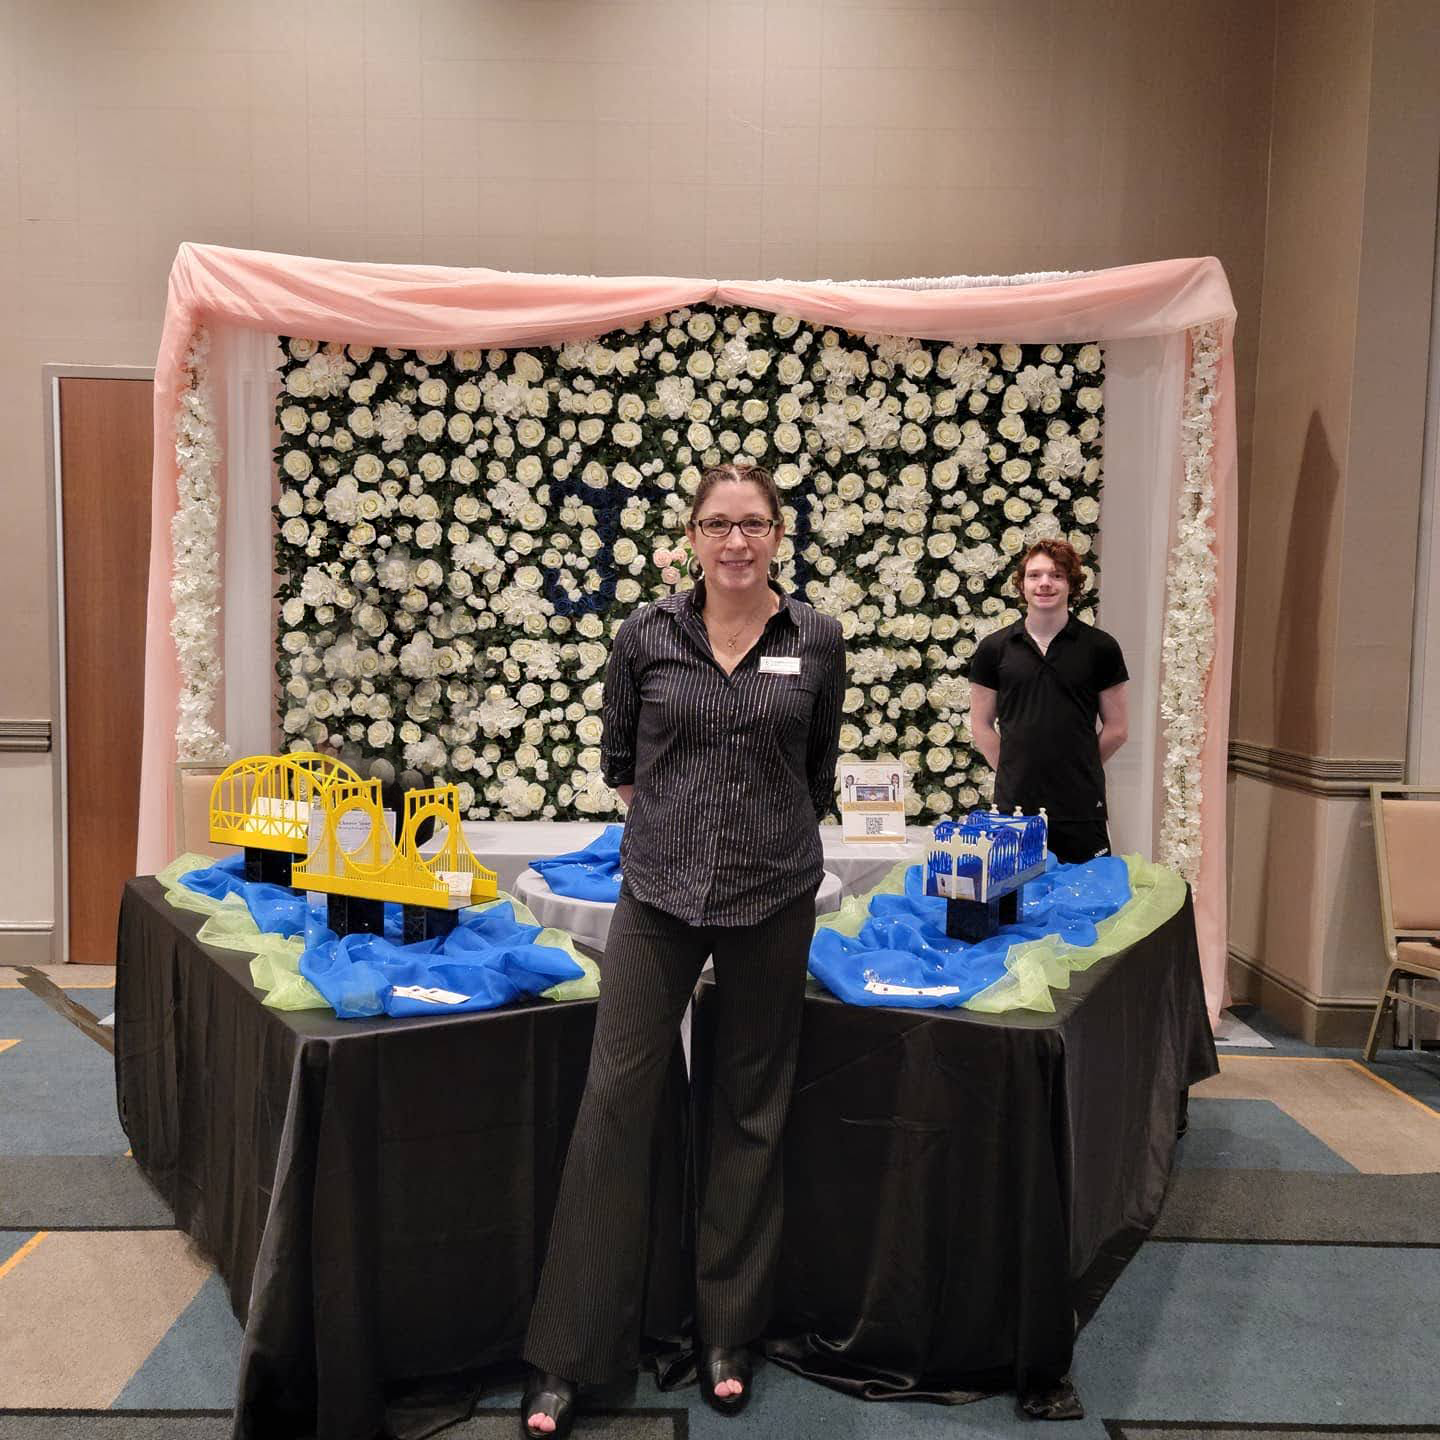 two women standing in front of a table with legos on it